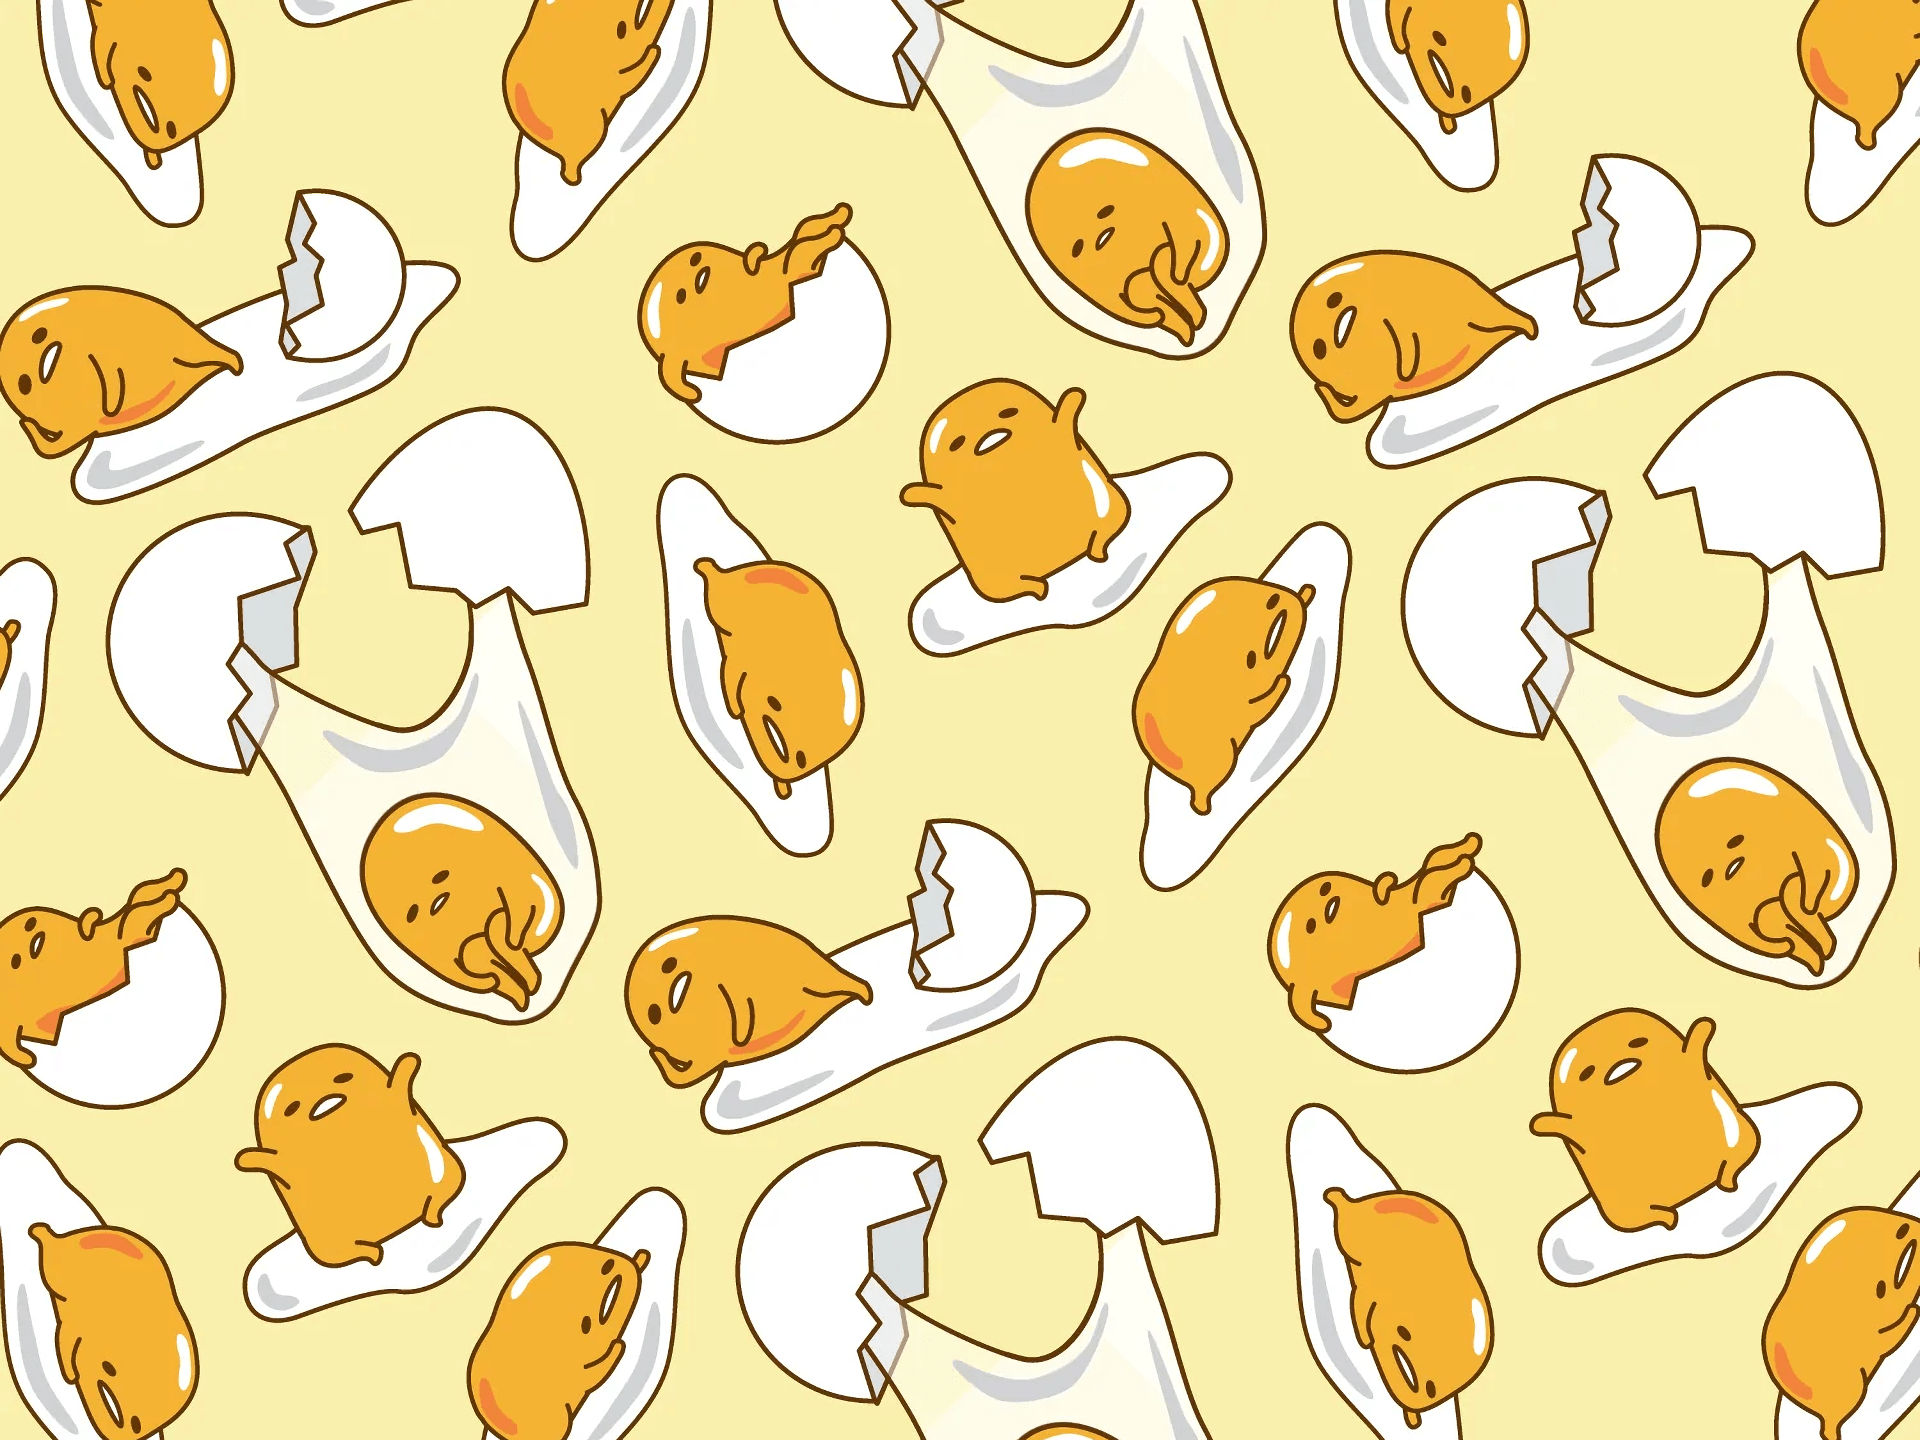 A pattern of a yellow egg with a face on it, and a white egg with a face on it. - Gudetama